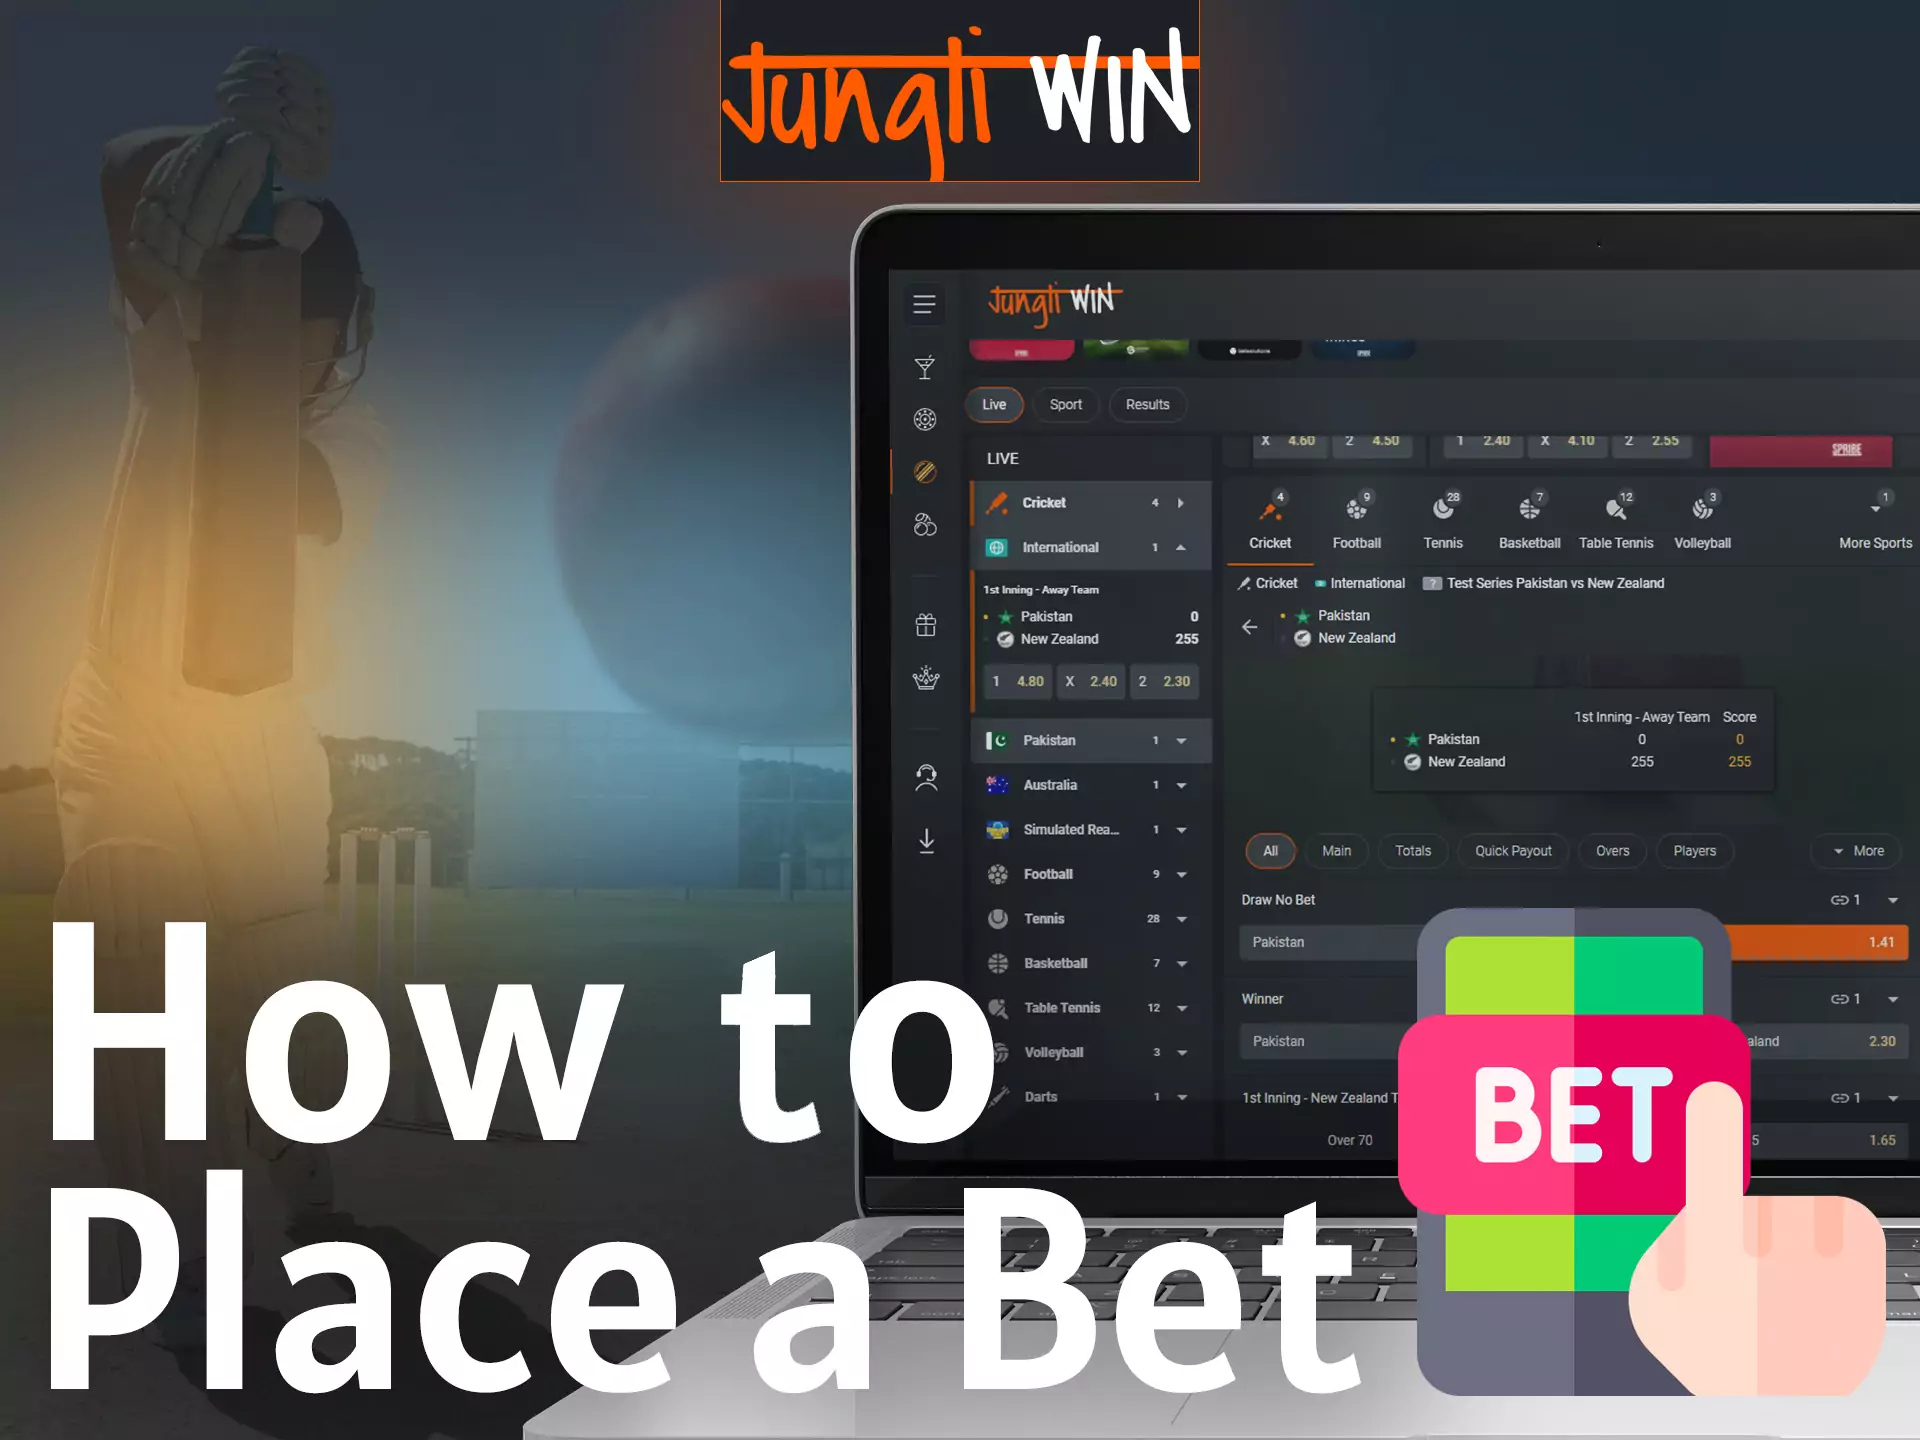 With this instruction, learn how to bet on Jungliwin.